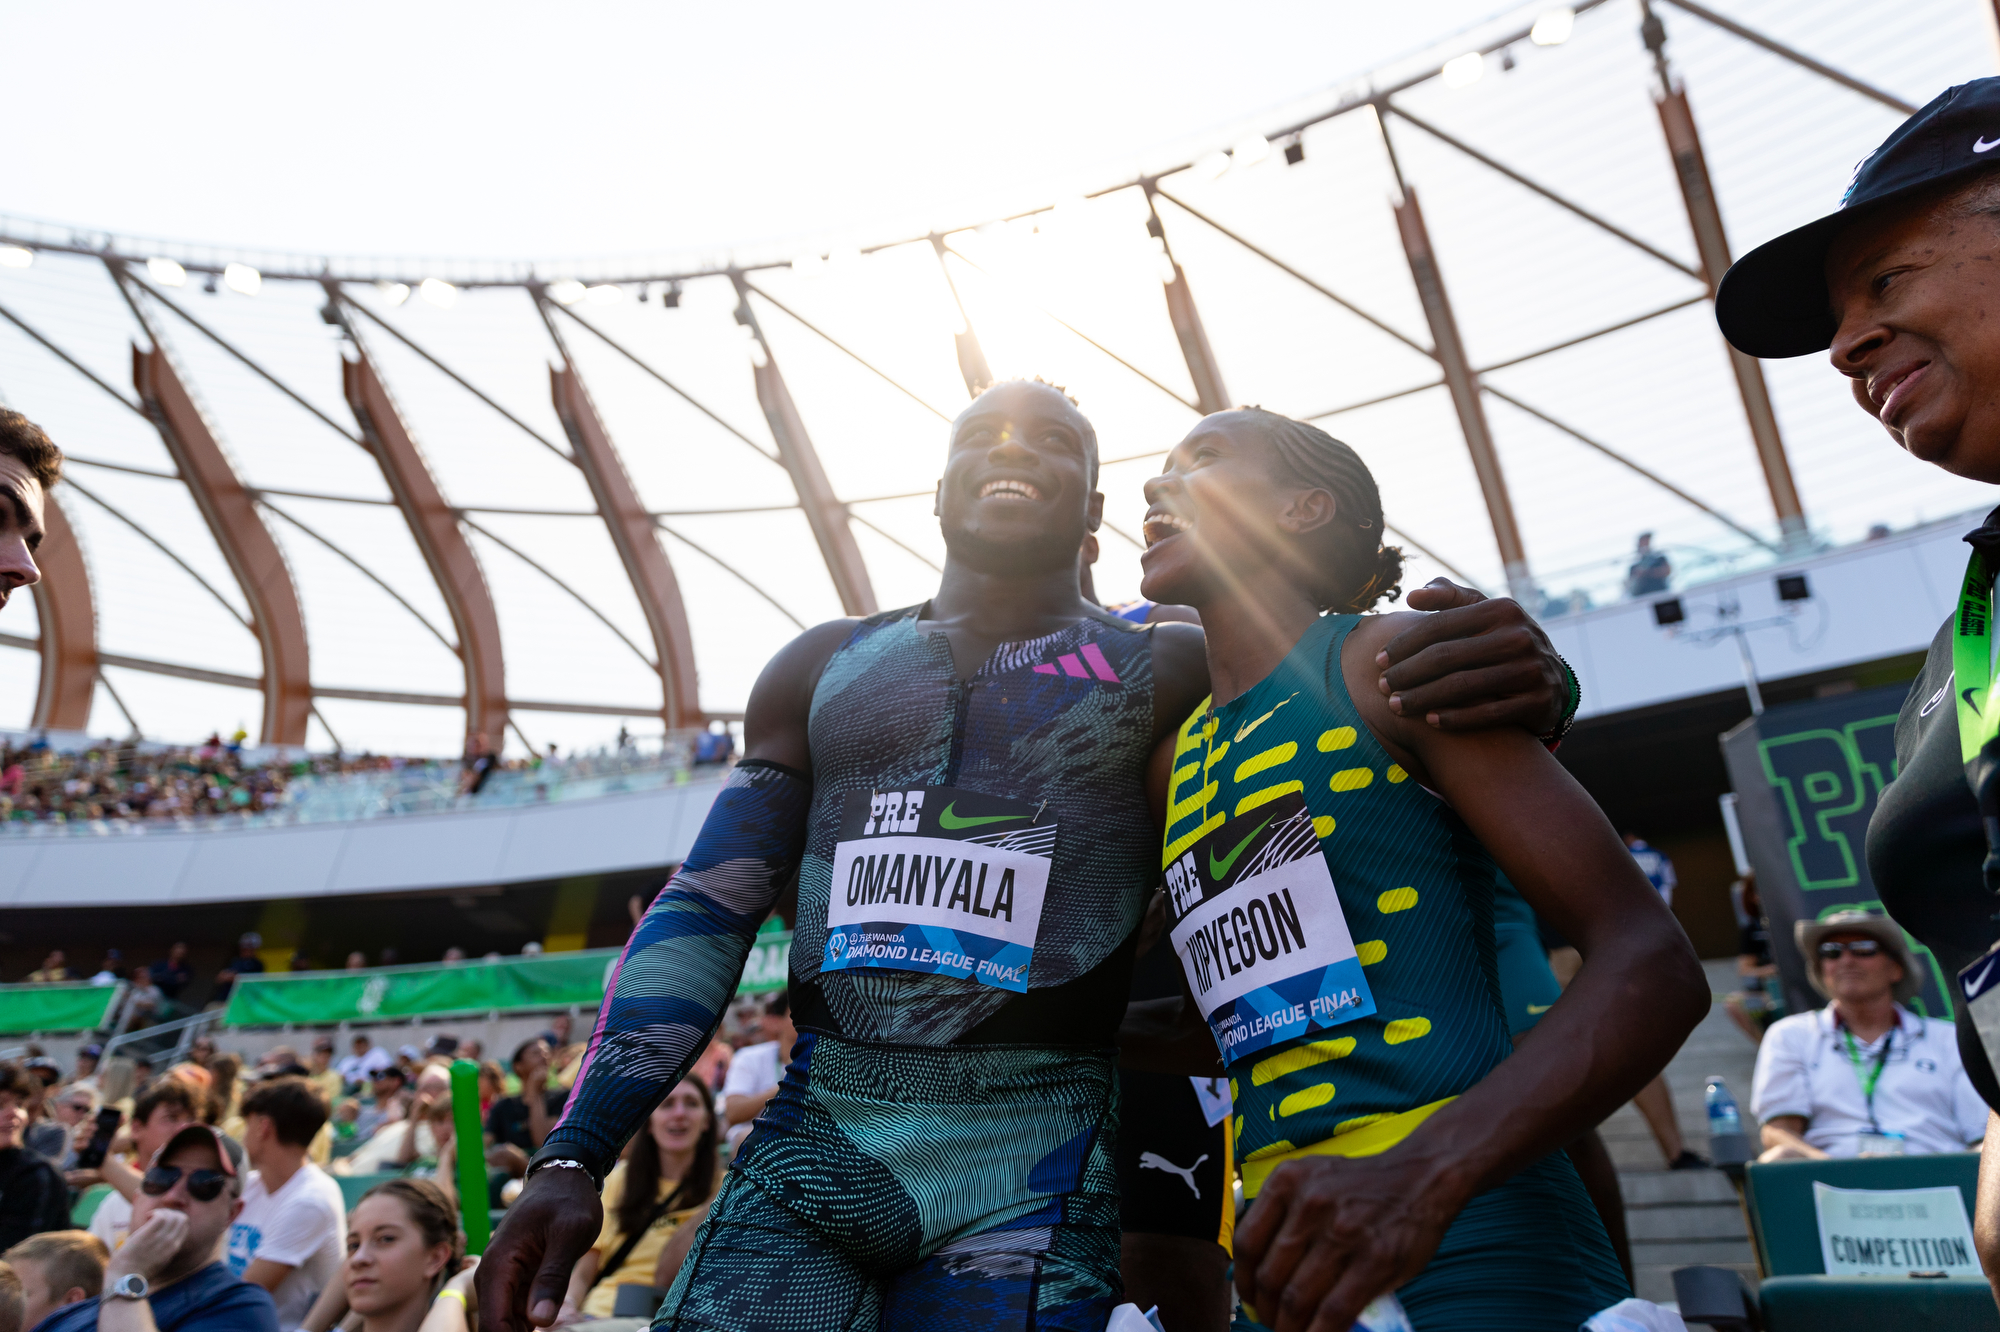 Kenyans Ferdinand Omanyala (left) and Faith Kipyegon celebrate together at the Prefontaine Classic track and field meet on Saturday, Sept. 16, 2023, at Hayward Field in Eugene. Omanyala placed third in the men’s 100 meters, and Kipyegon won the women’s 1,500.